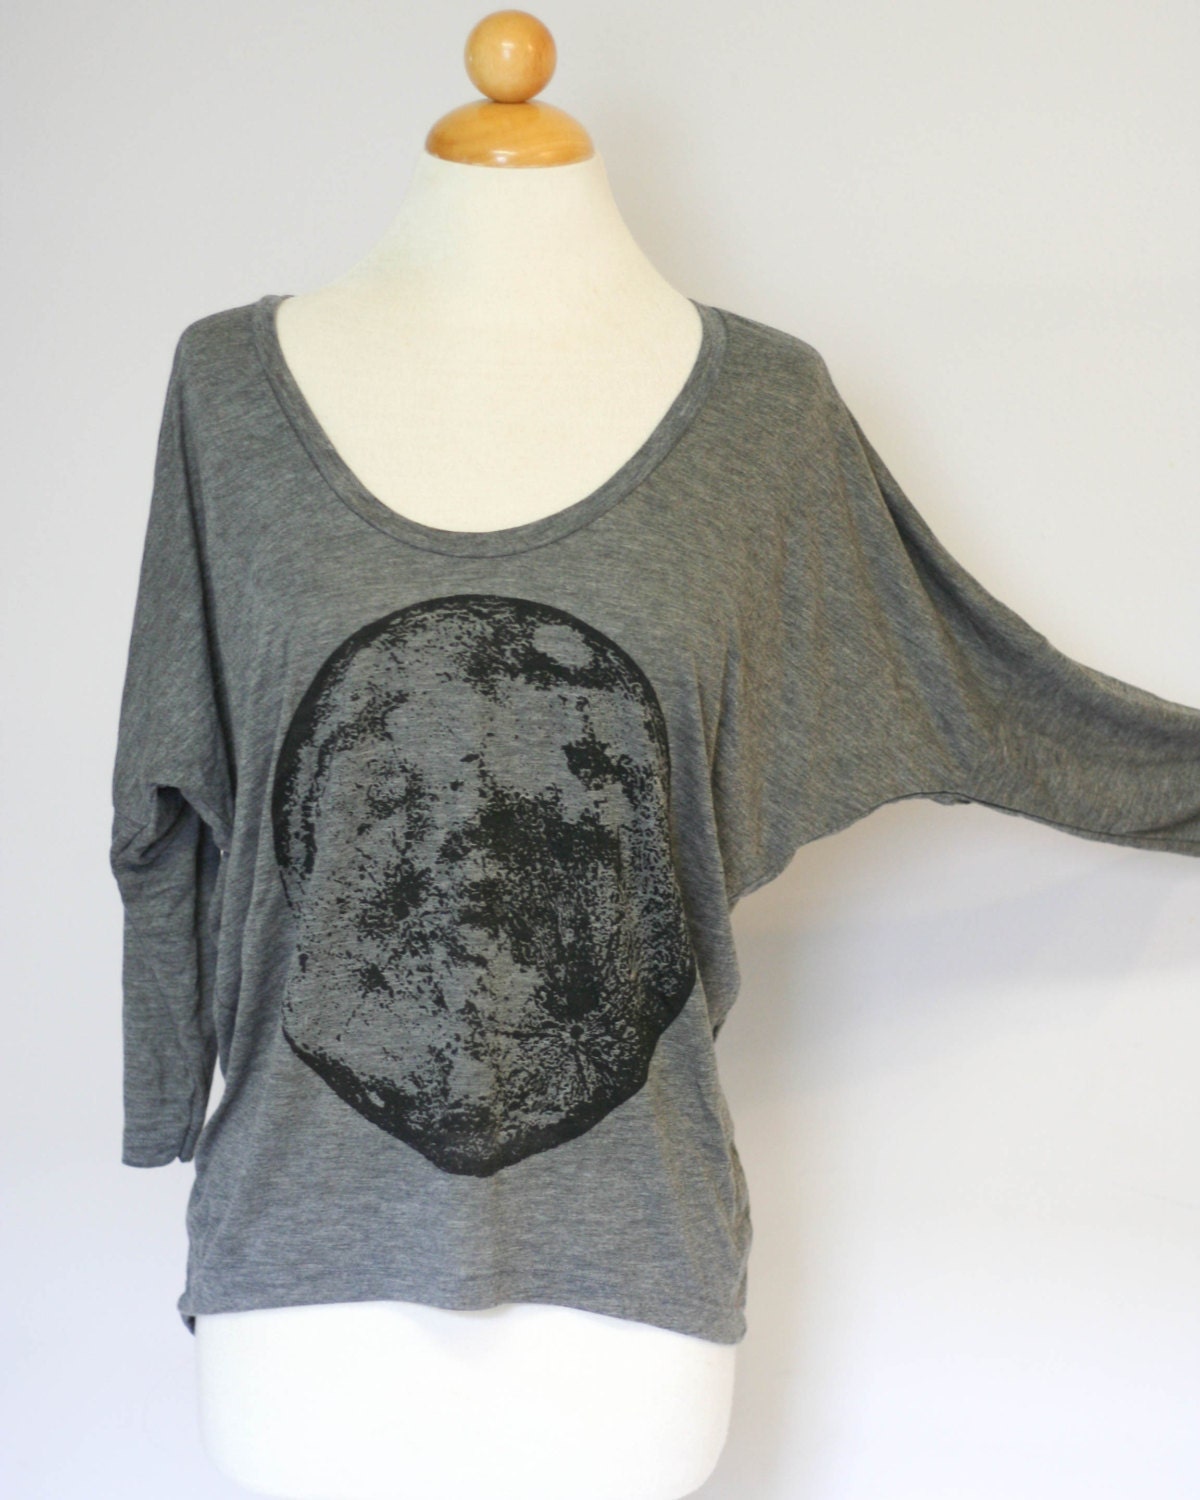 Hand Screen Printed Apparel by circularaccessories on Etsy